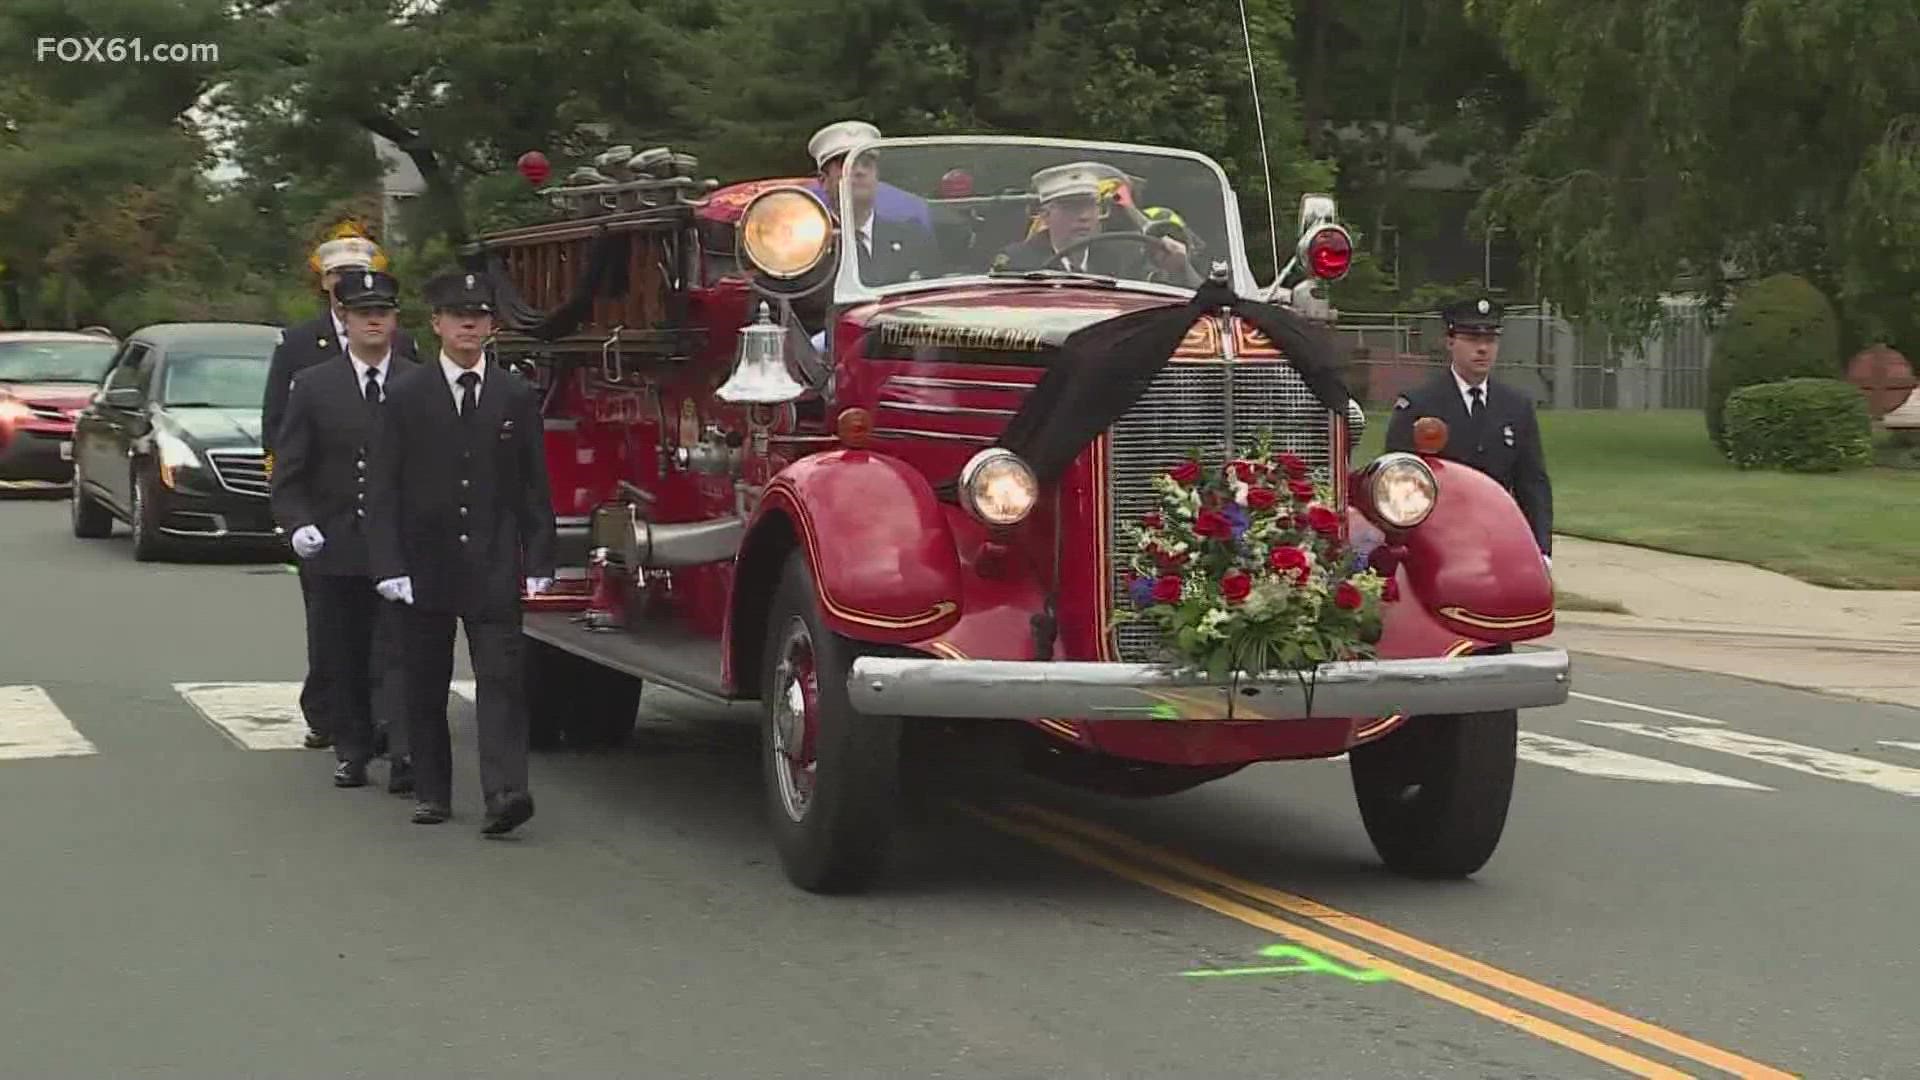 Burlington firefighter was honored by hundreds.